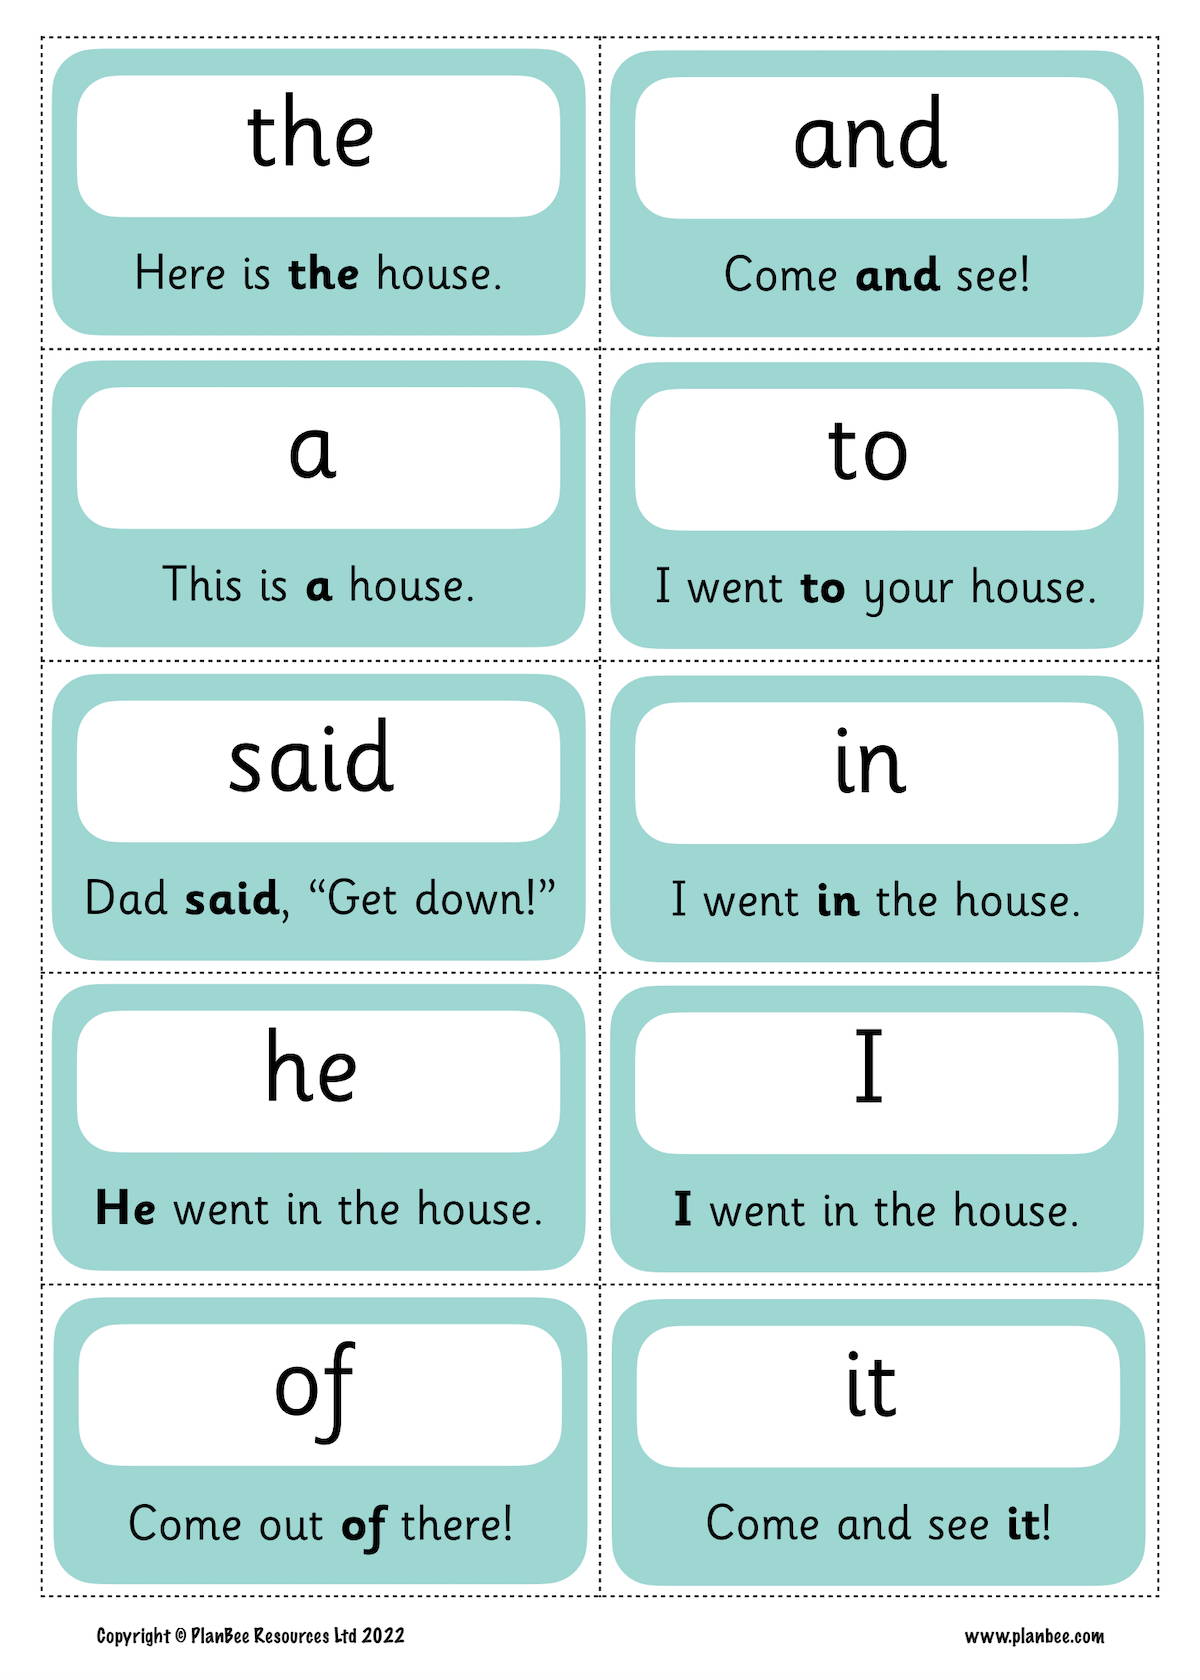 FREE 100 High Frequency Words Flashcards | PlanBee